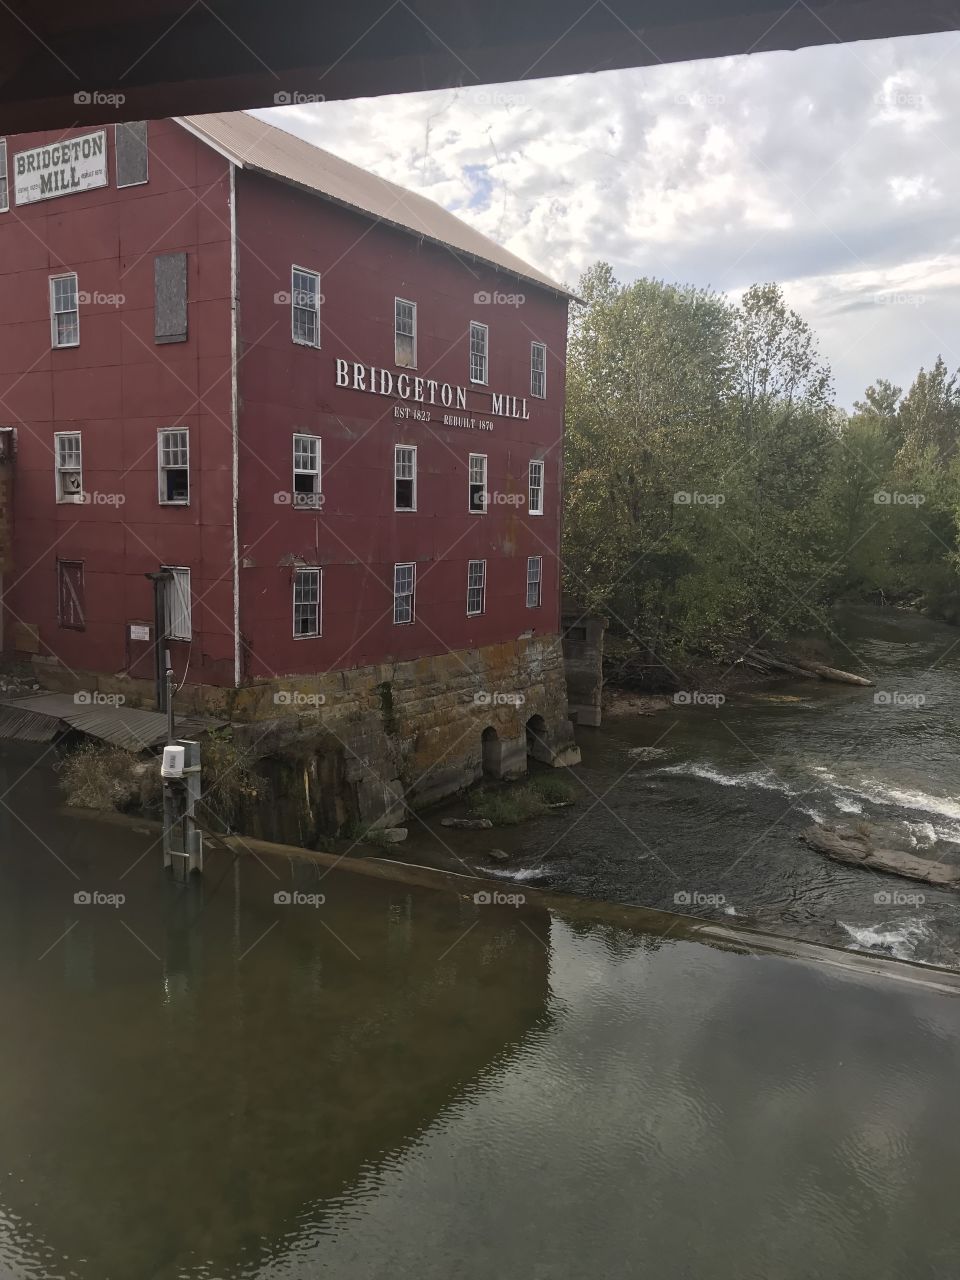 The old Mill from Bridgeton, Indiana surrounded by its gorgeous lake. 